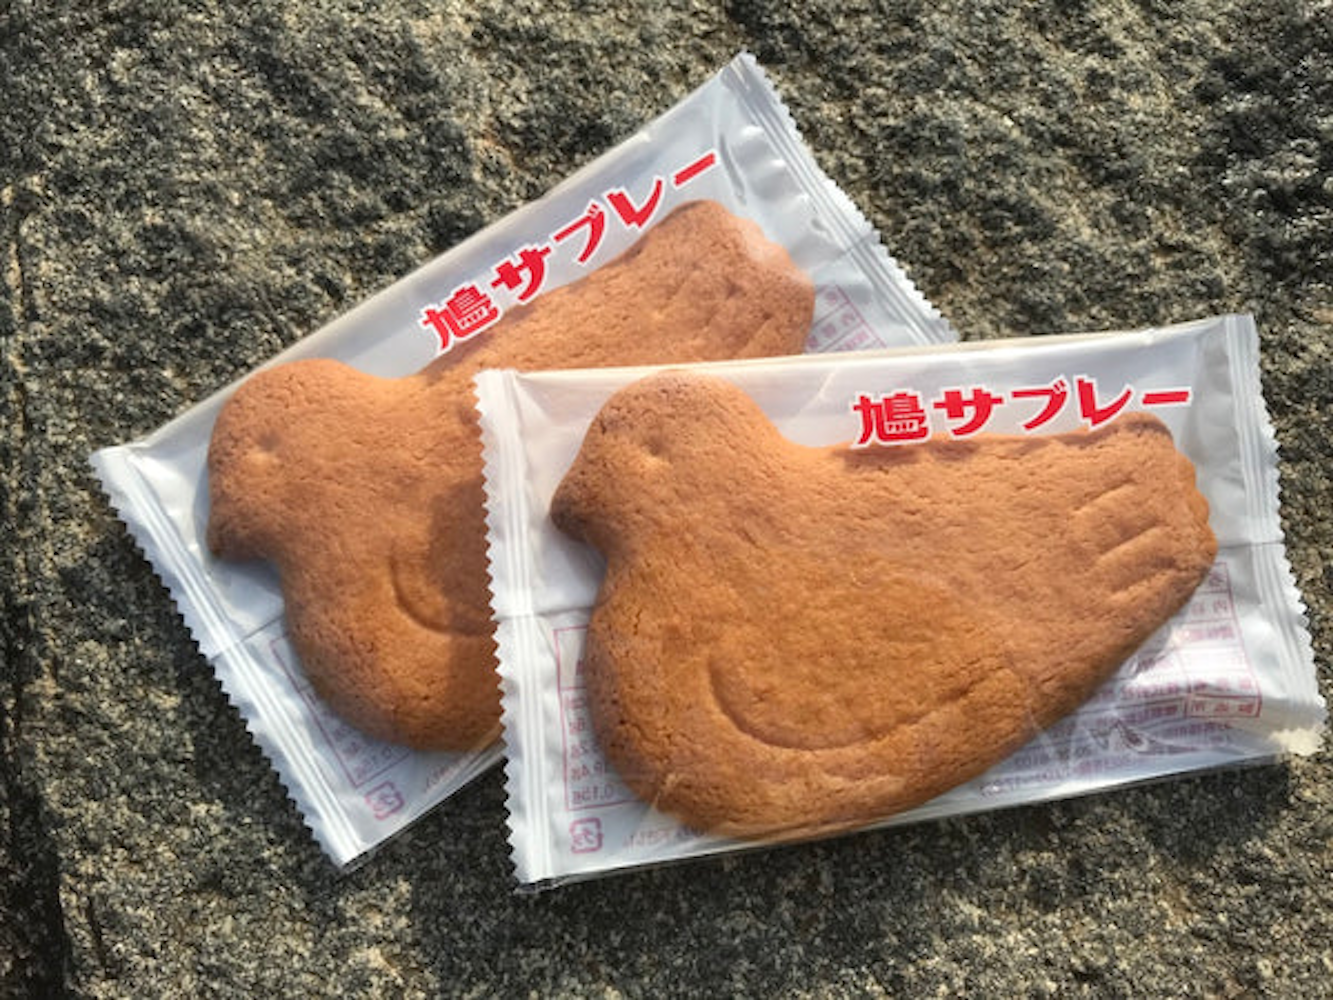 Two delectable cookies adorned with a charming bird design, representing the iconic Kamakura pigeon scone, a beloved local treat.